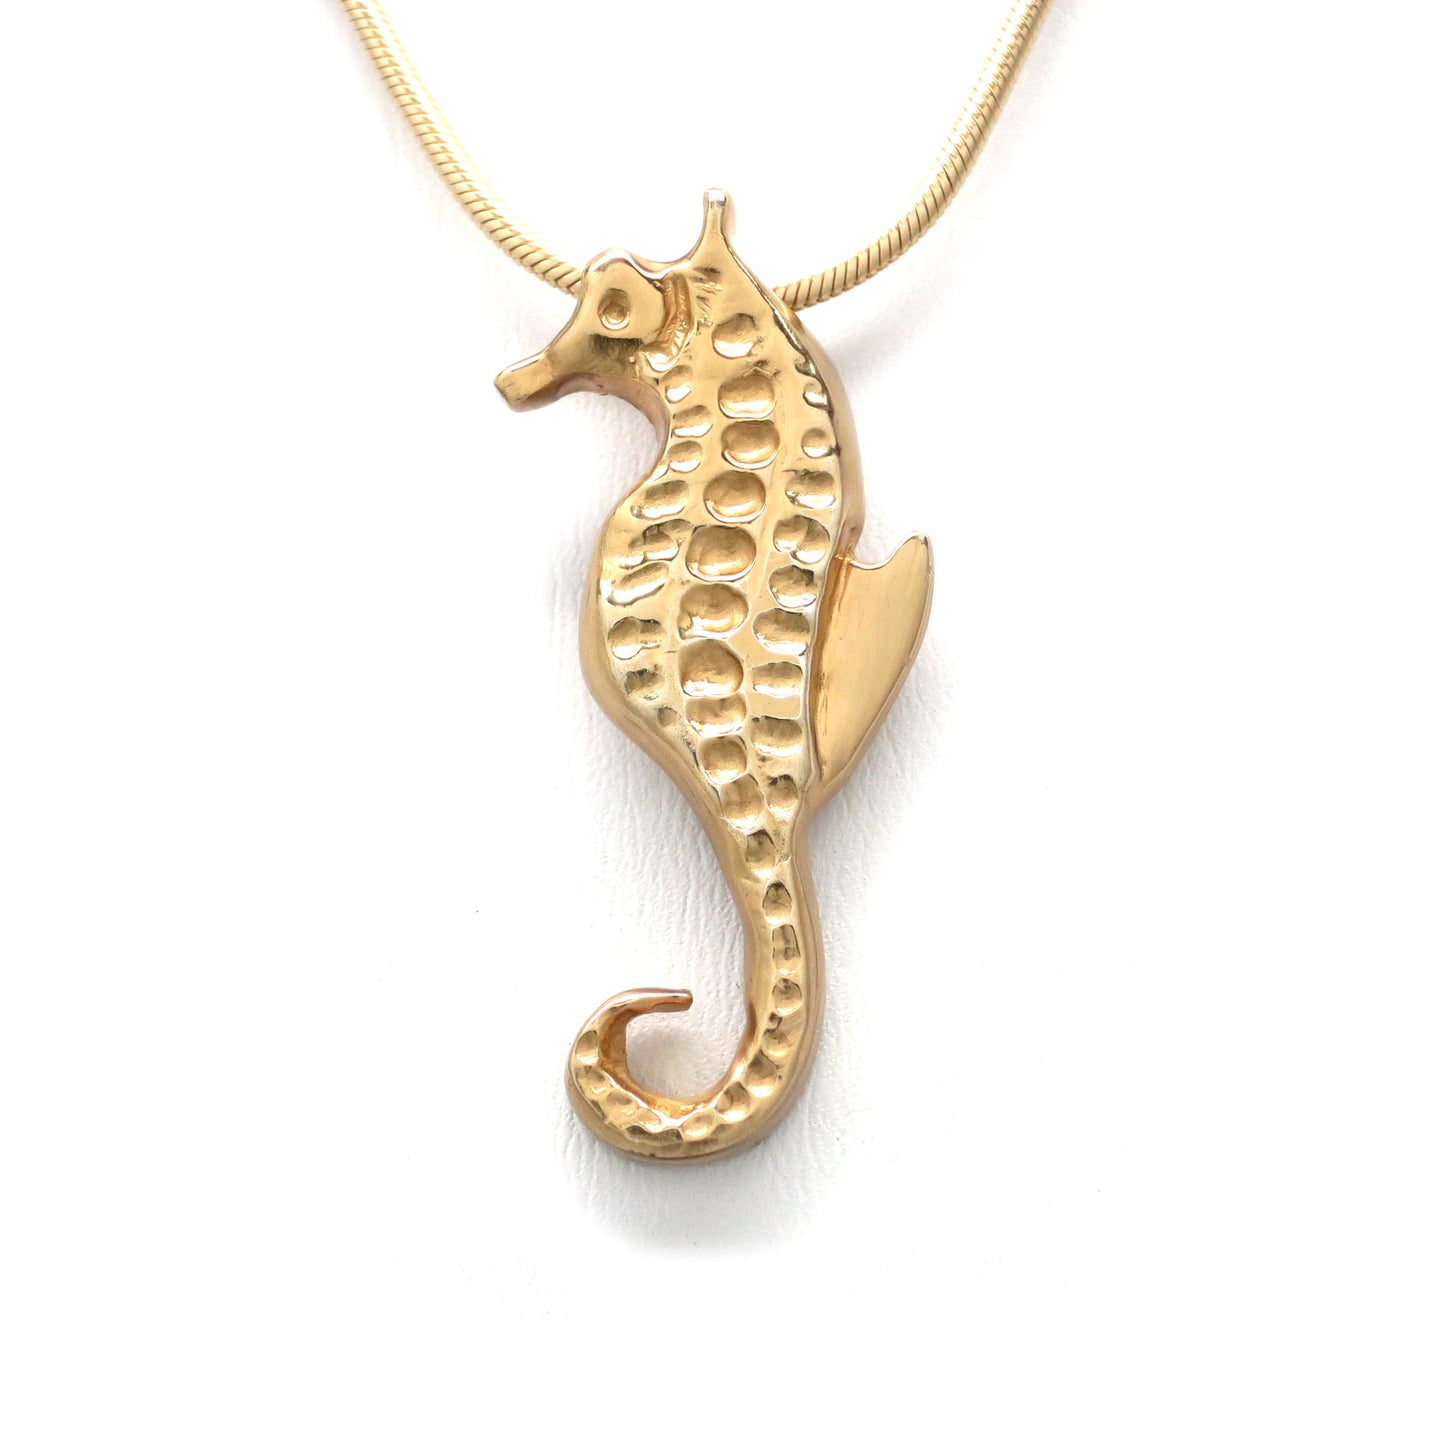 Michele Benjamin Seahorse Necklace, Vermeil 18K Gold Plated Sterling Silver 